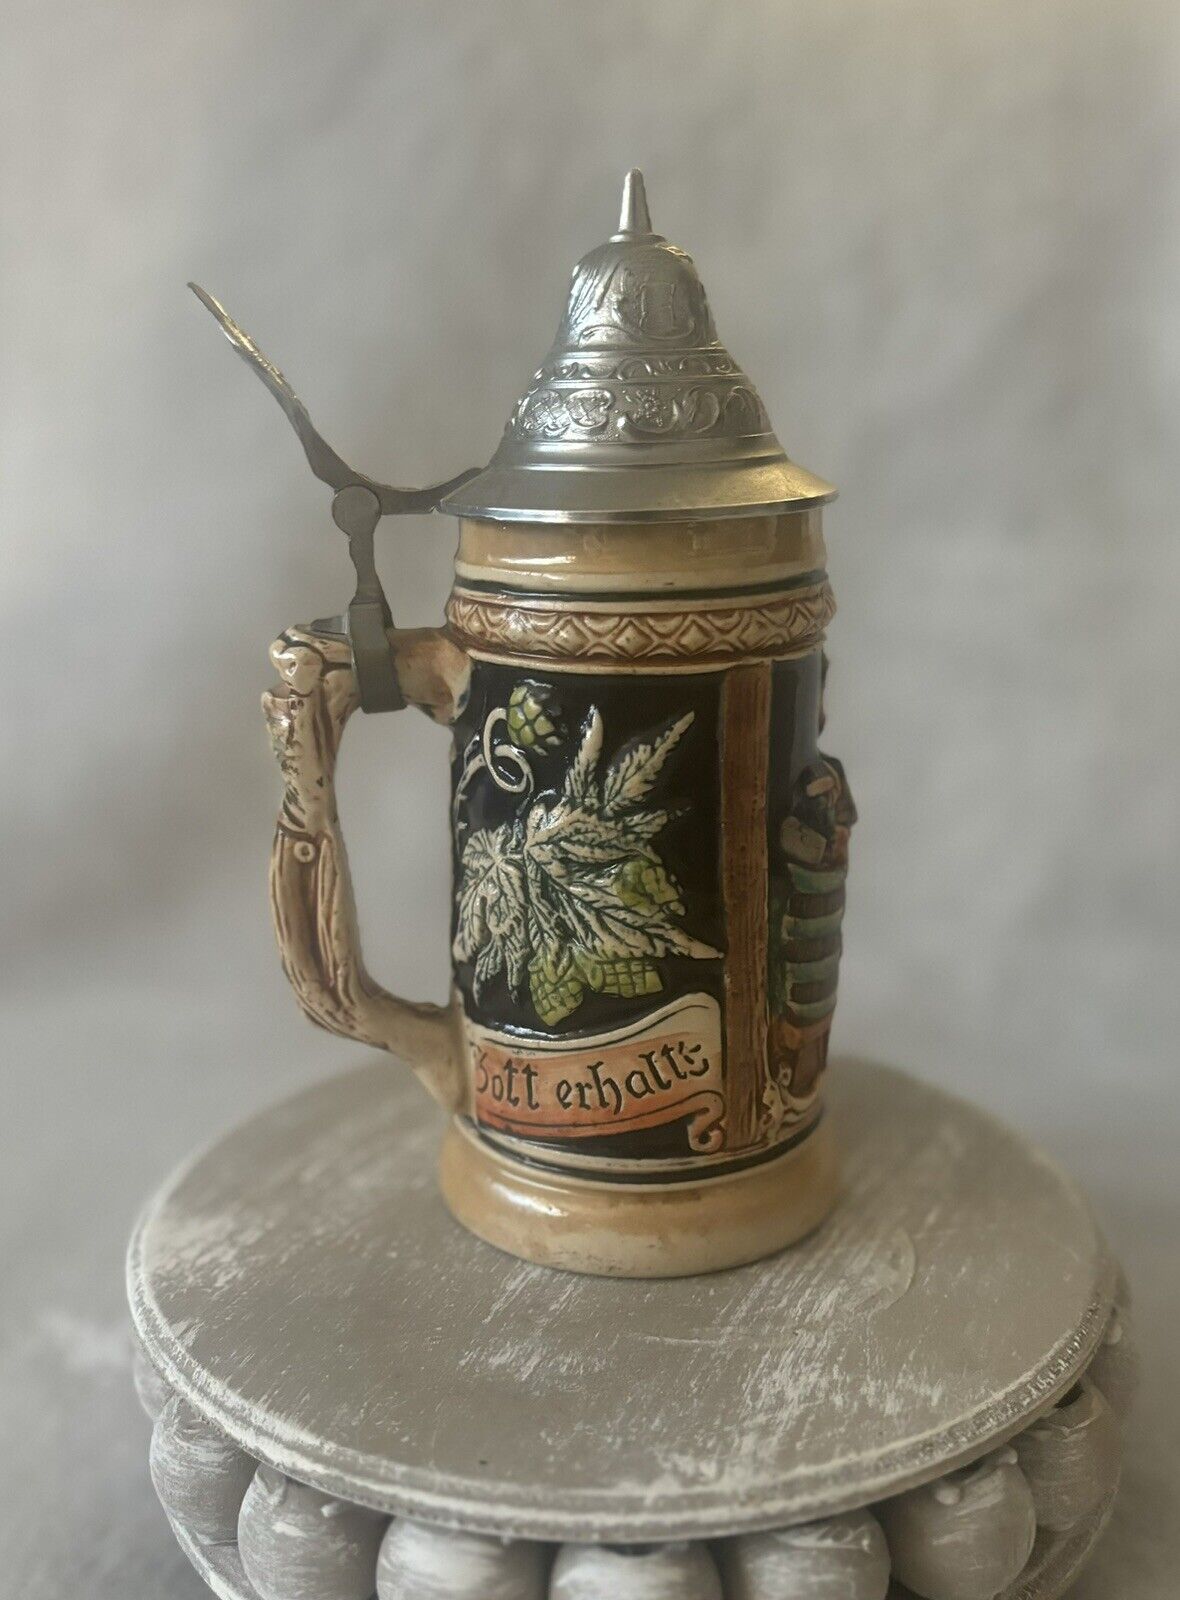 Vintage DBGM Pewter Lidded Beer Stein - Germany  - Great Condition